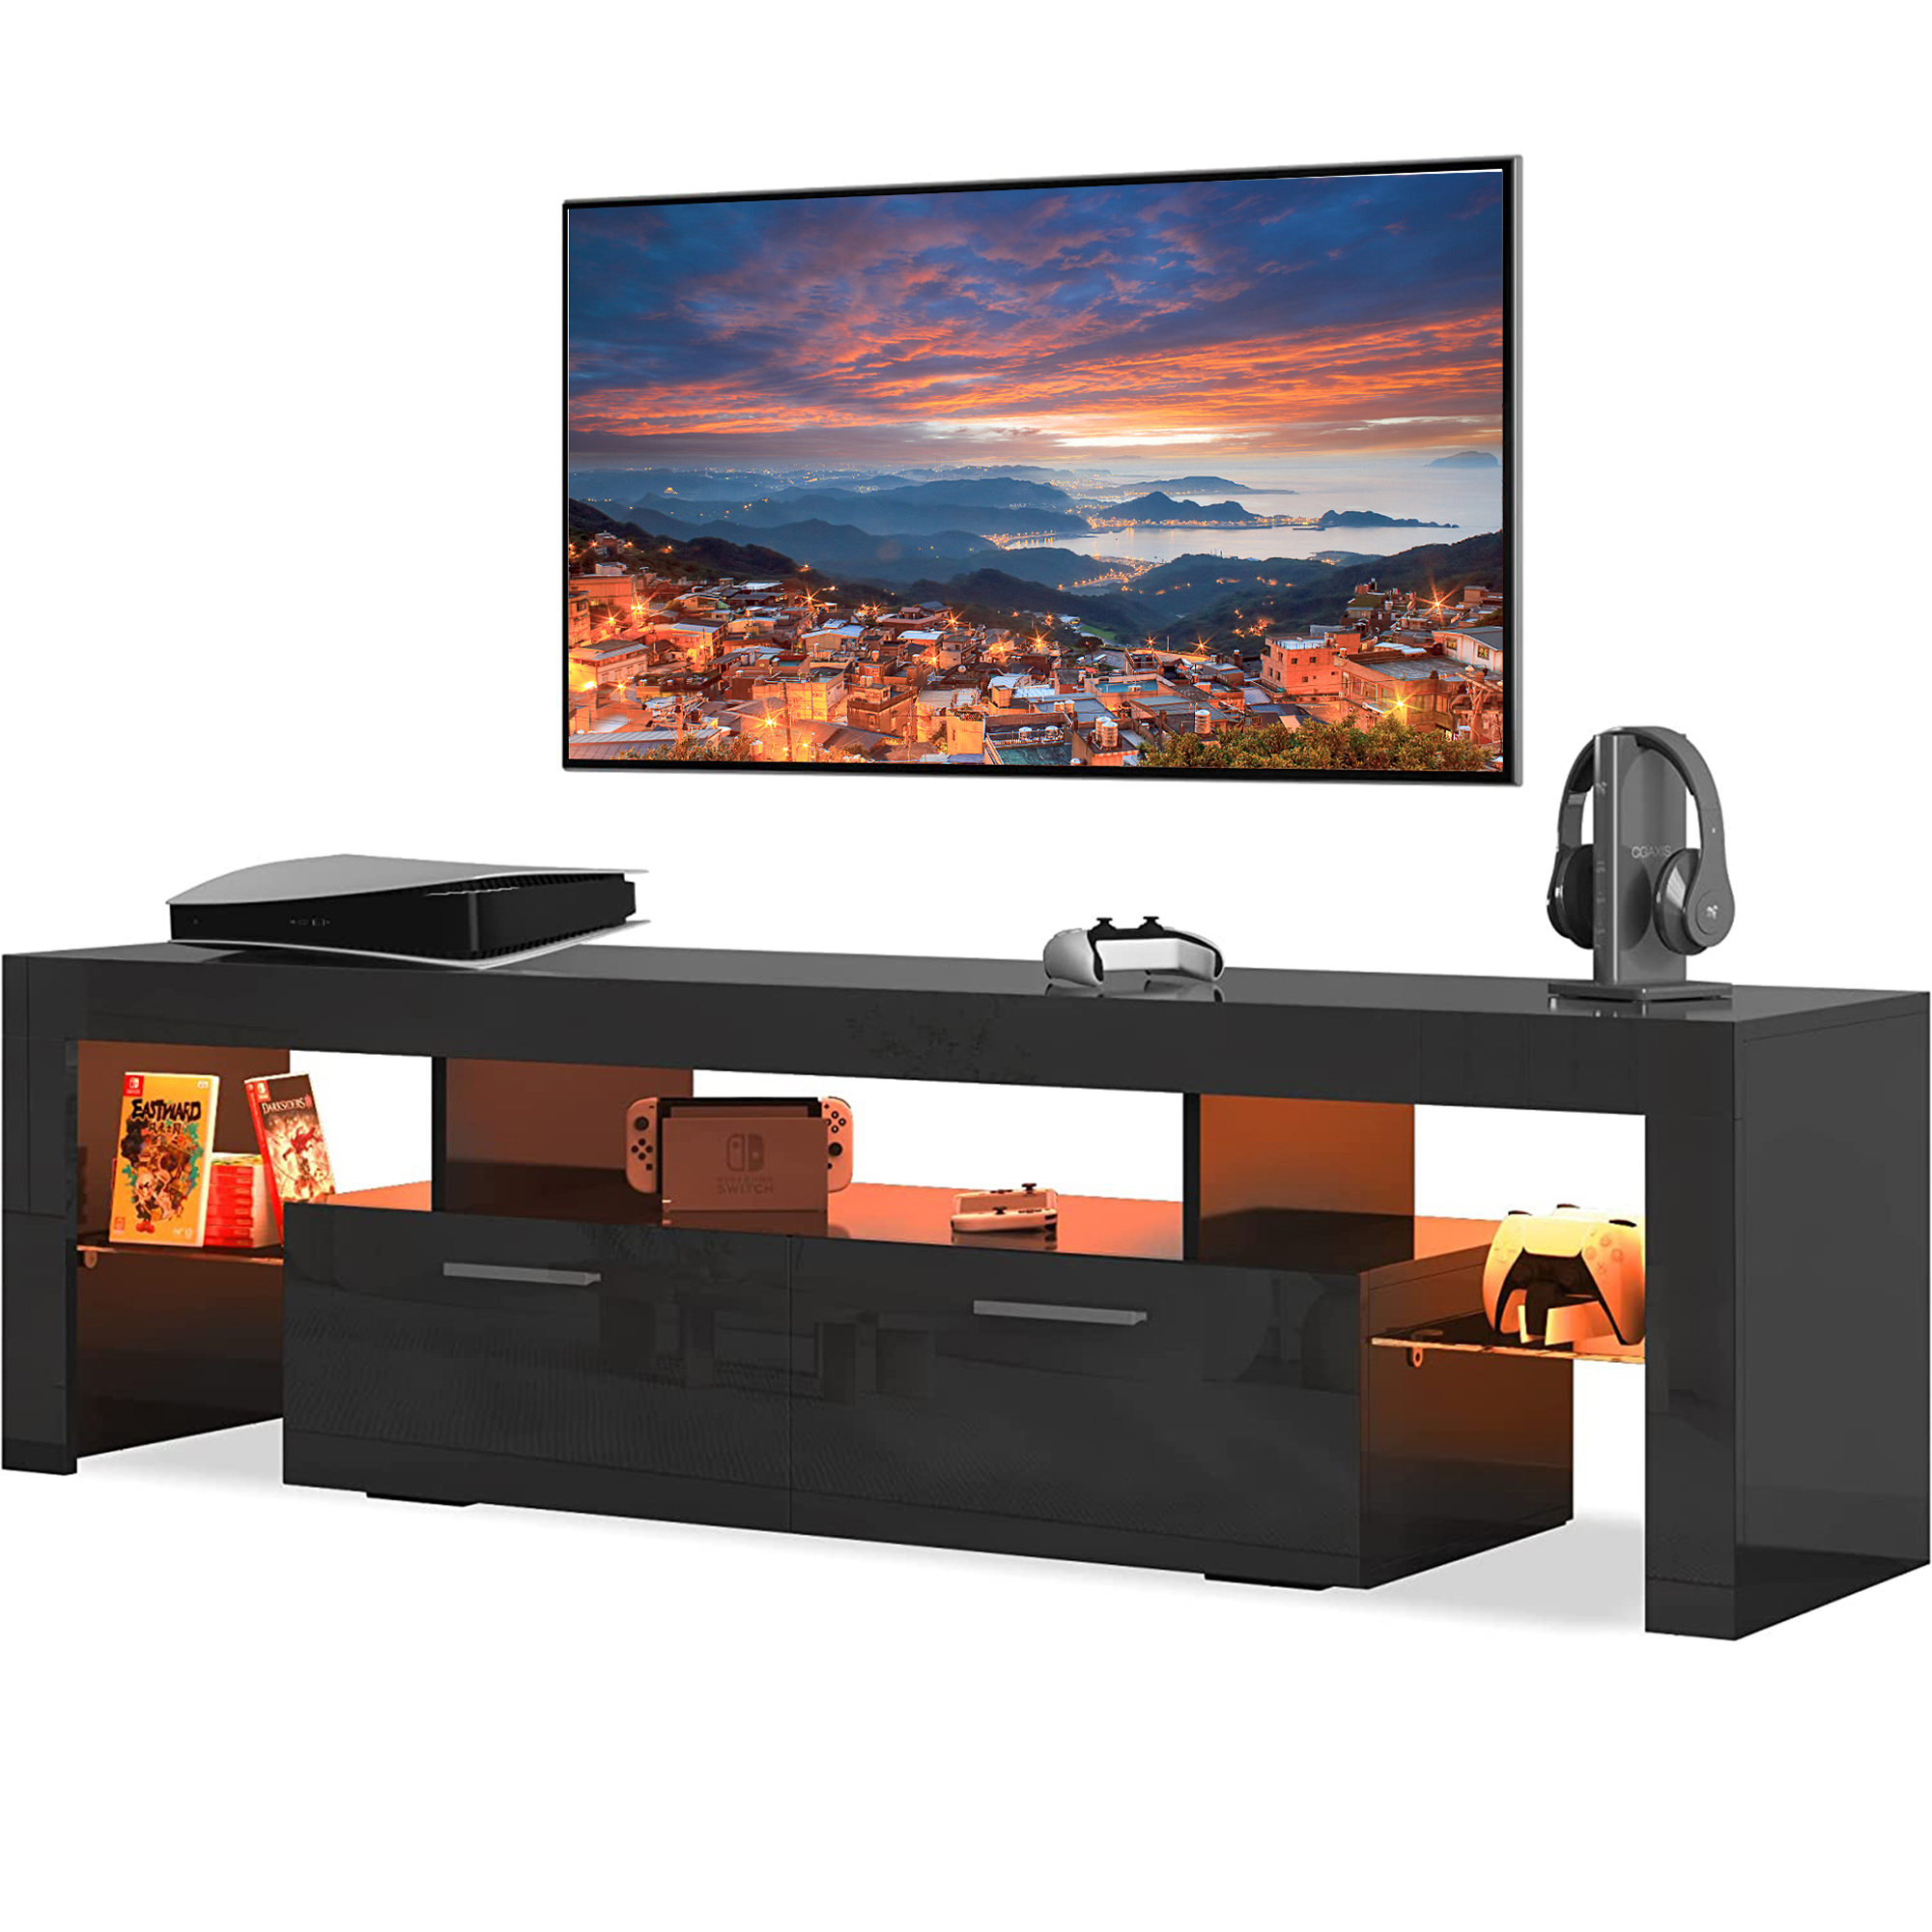 Black TV Stand for 70 inch TV, Modern High Glossy Television Table Stands TV Cabinet Console Table with 16 Colors LED Lights, TV Buffet Cabinet with Storage, Living Room Entertainment Center - image 1 of 13